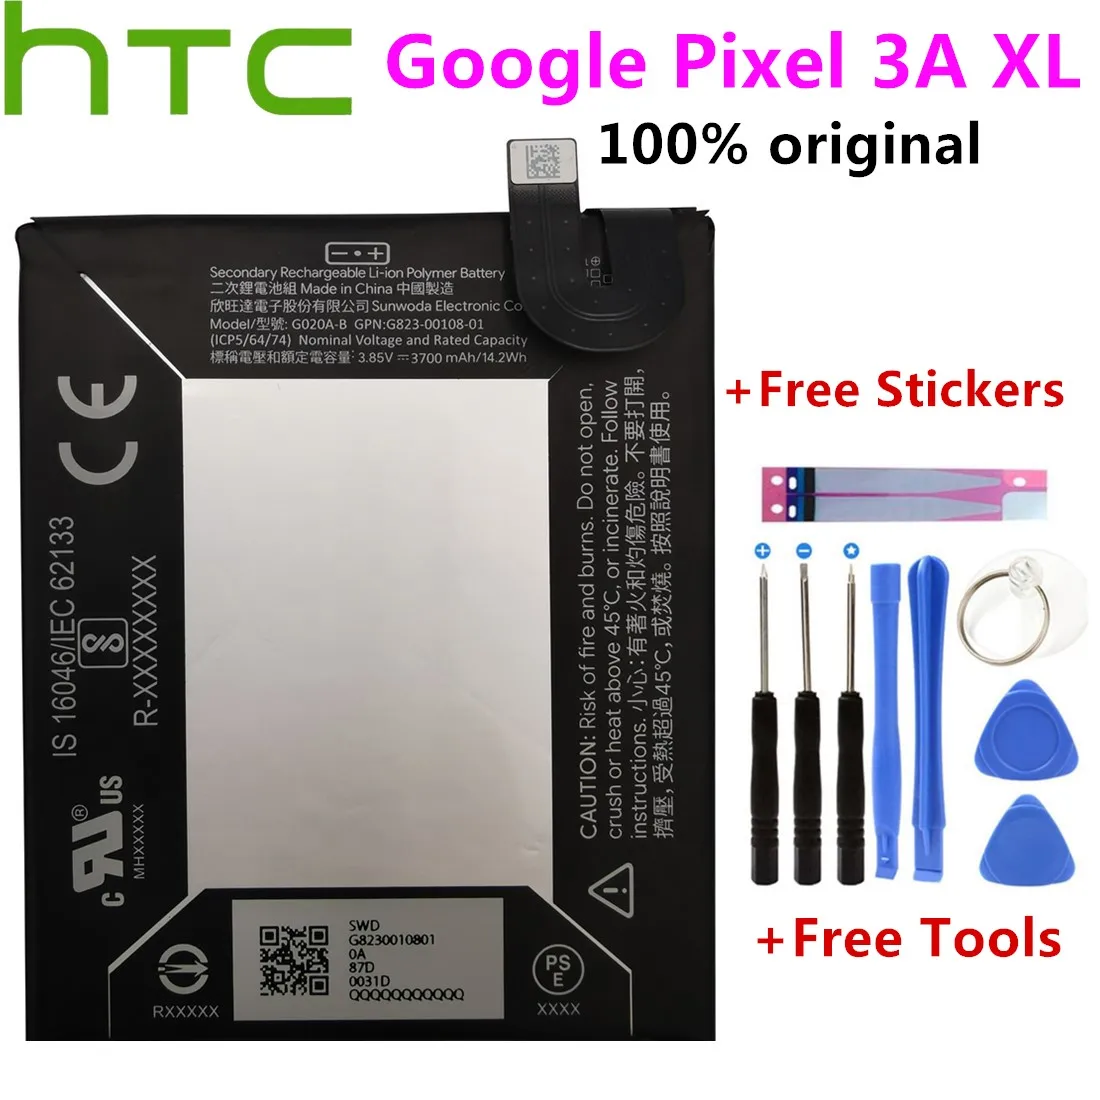 

100% original 3700mAh / 14.24Wh G020A-B Phone Replacement Battery For HTC Google Pixel 3A XL Batteries+ Tools +stickers